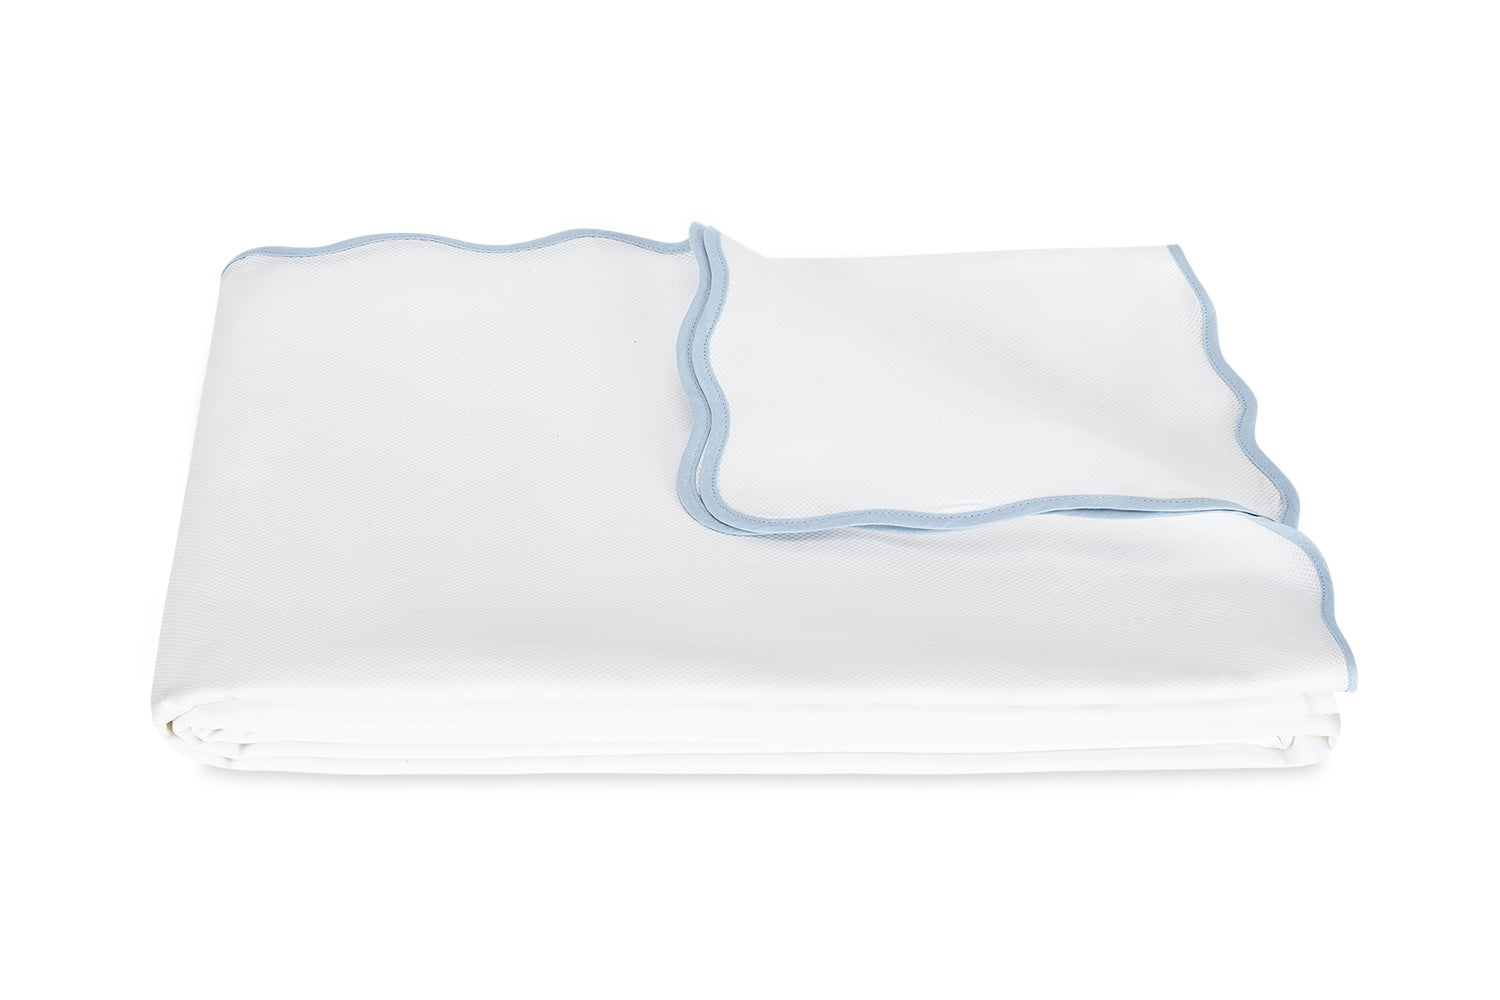 Coverlet - Matouk Camila Pique Light Blue Blanket Cover at Fig Linens and Home